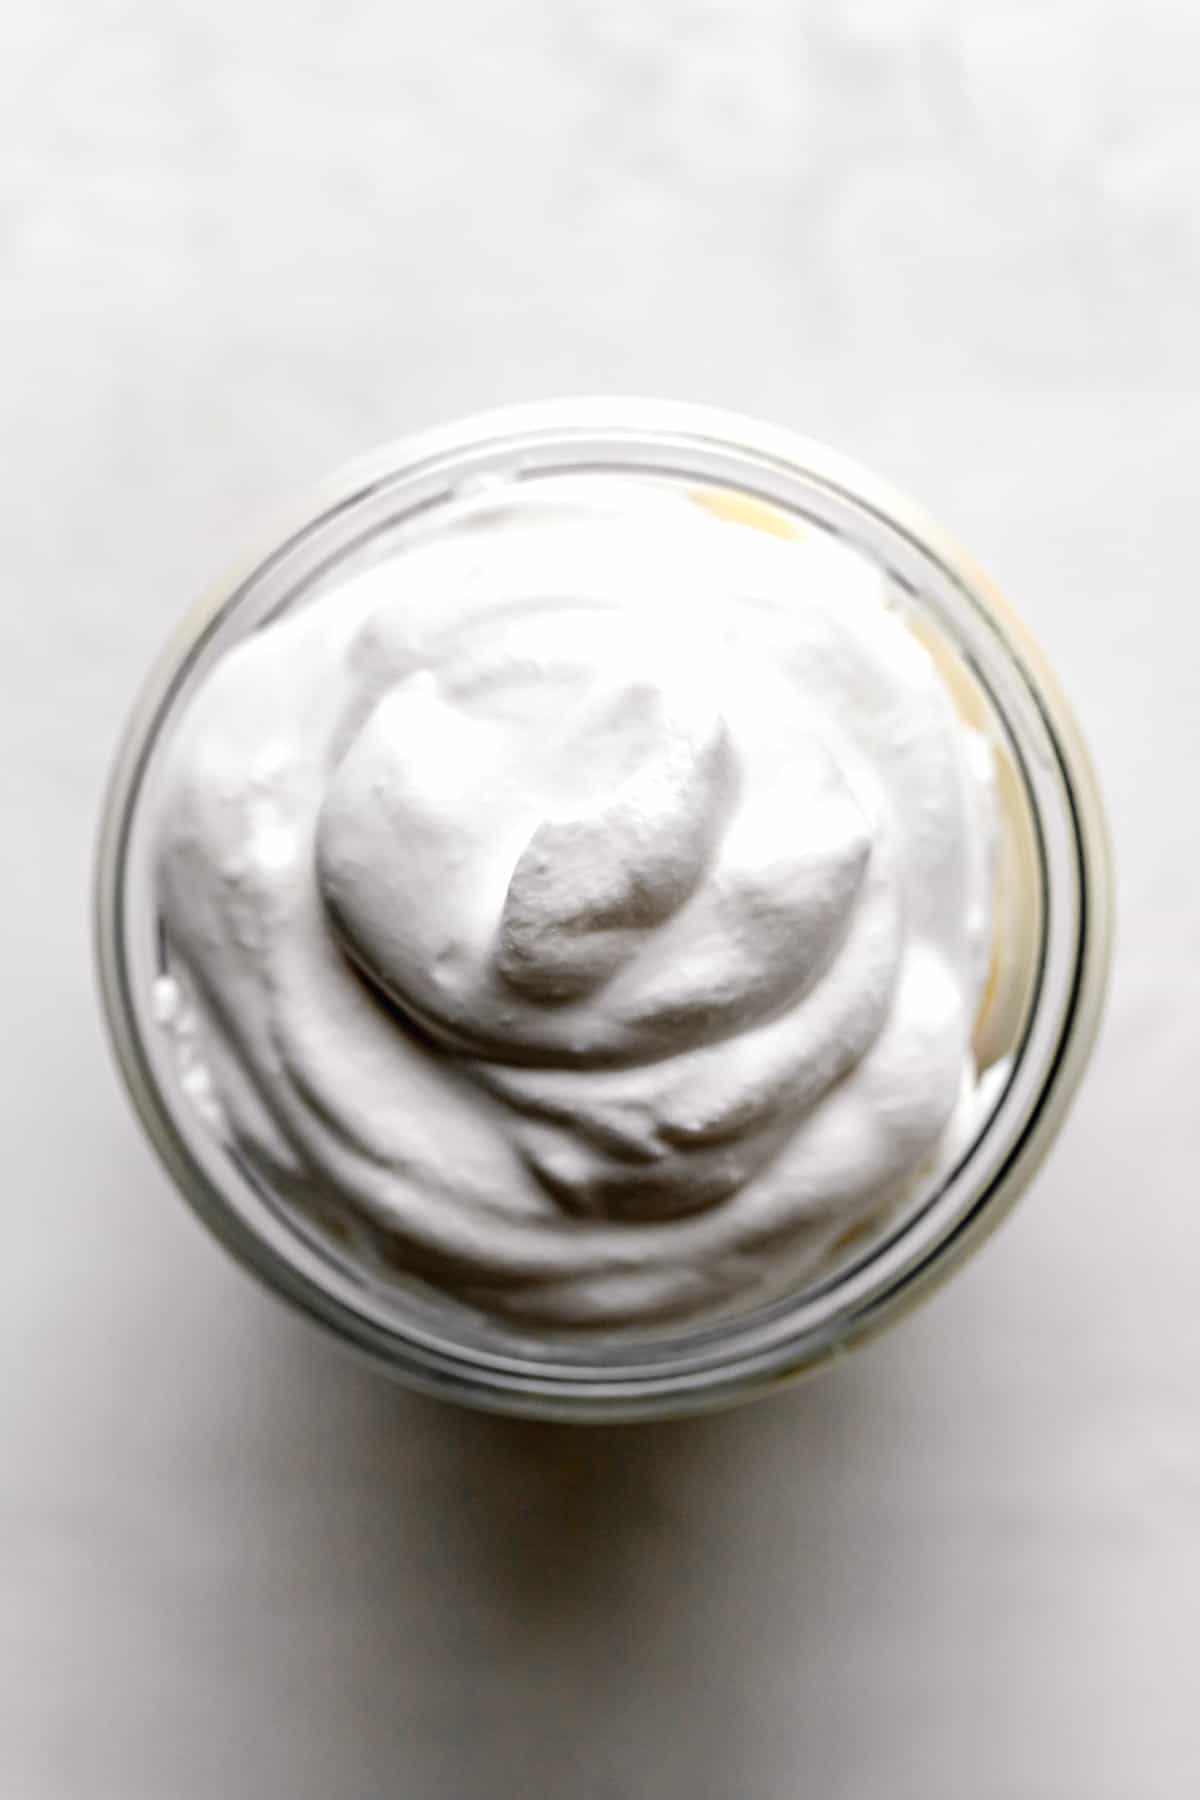 whipped cream layer added in jar